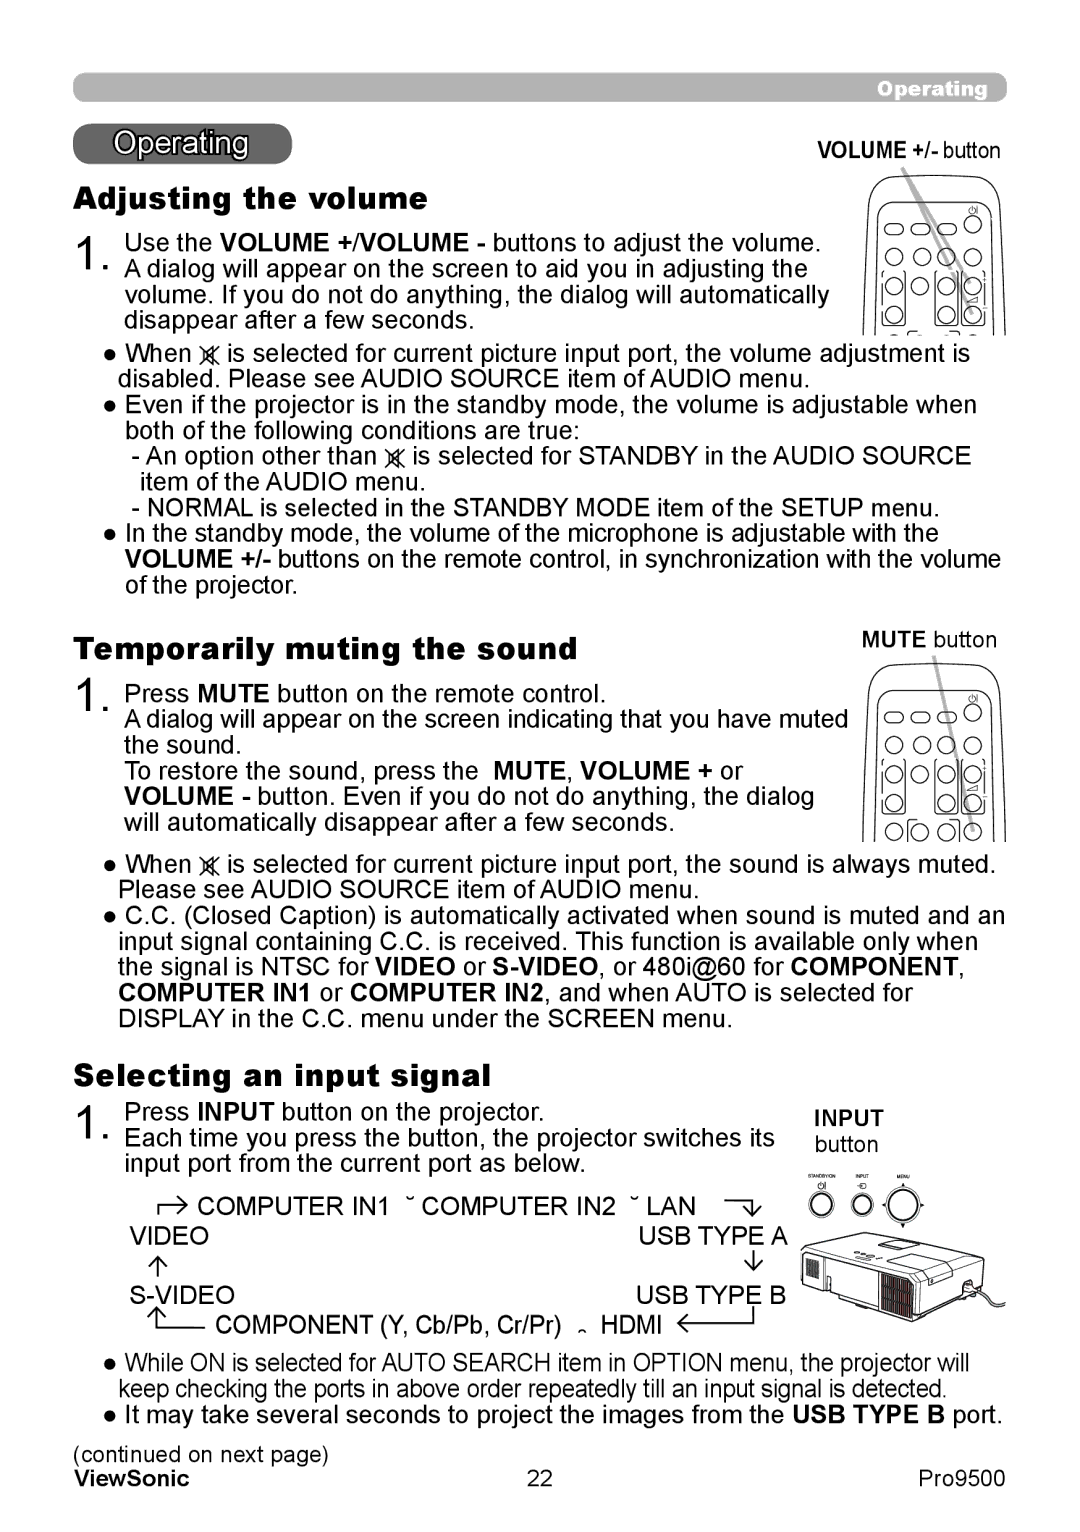 ViewSonic VS13835 warranty Operating, Adjusting the volume, Temporarily muting the sound, Selecting an input signal 